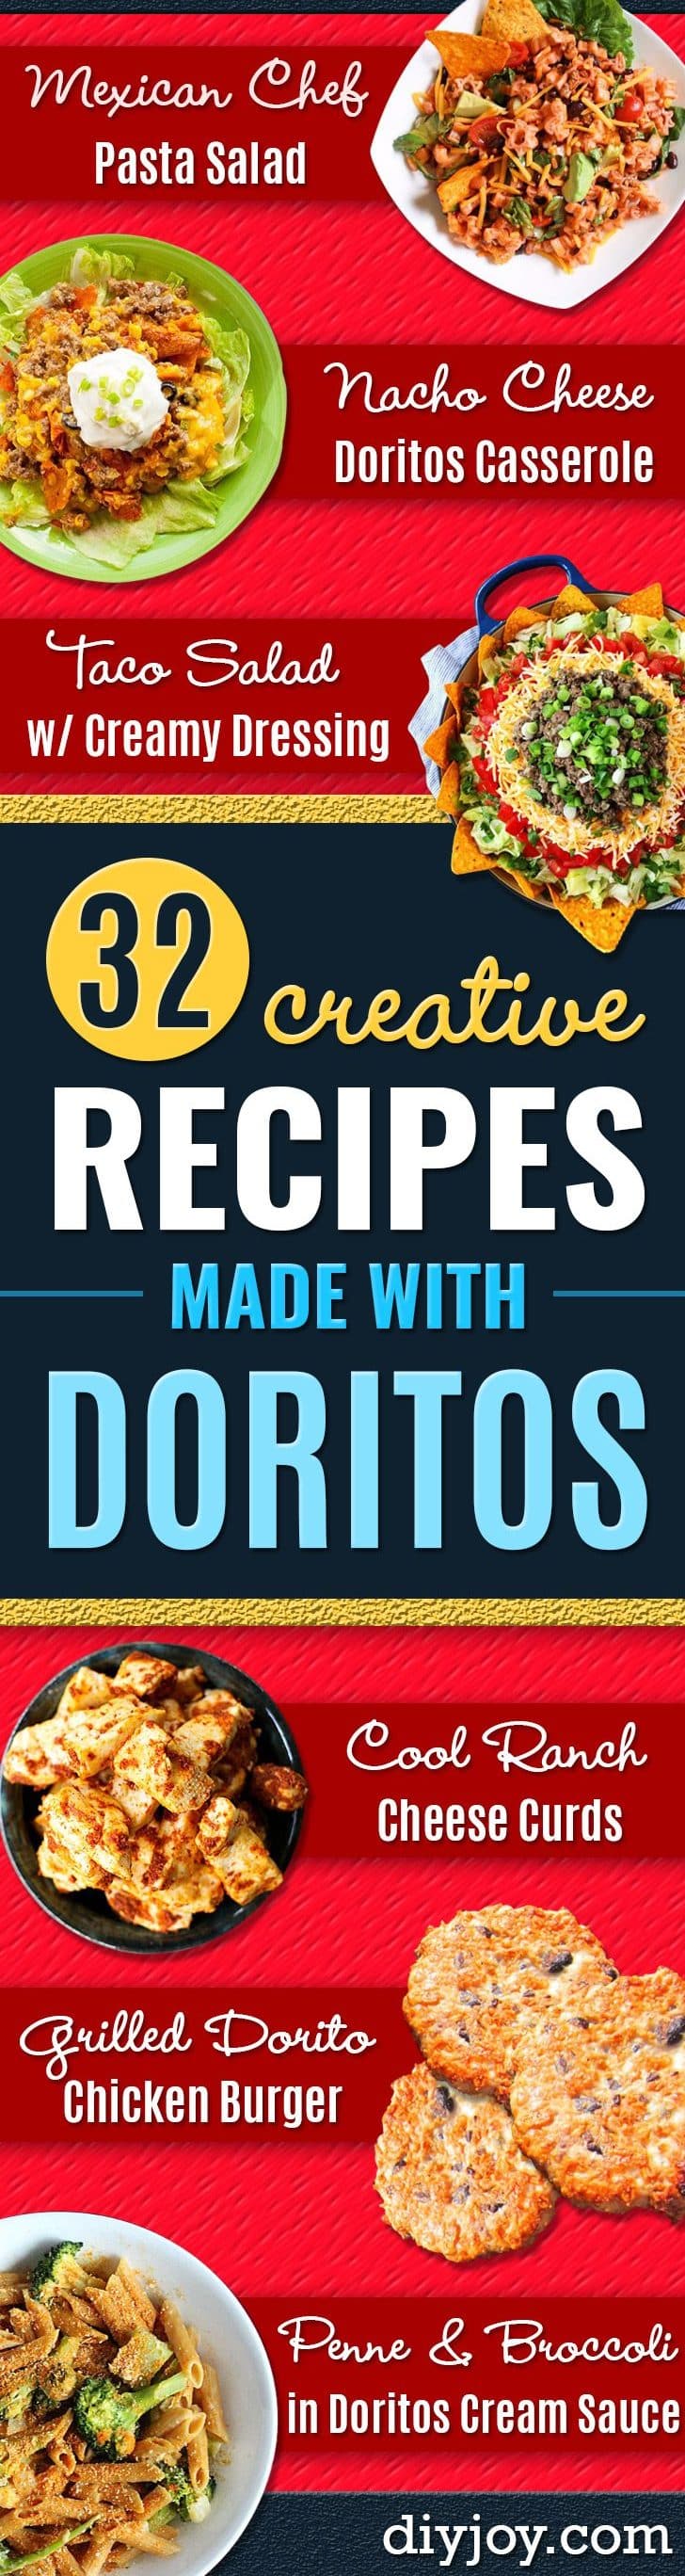 DIY Recipes Made With Doritos - Best Dorito Recipes for Casserole, Taco Salad, Chicken Dinners, Beef Casseroles, Nachos, Easy Cool Ranch Meals and Ideas for Dips, Snacks and Kids Recipe Tutorials - Quick Lunch Ideas and Recipes for Parties